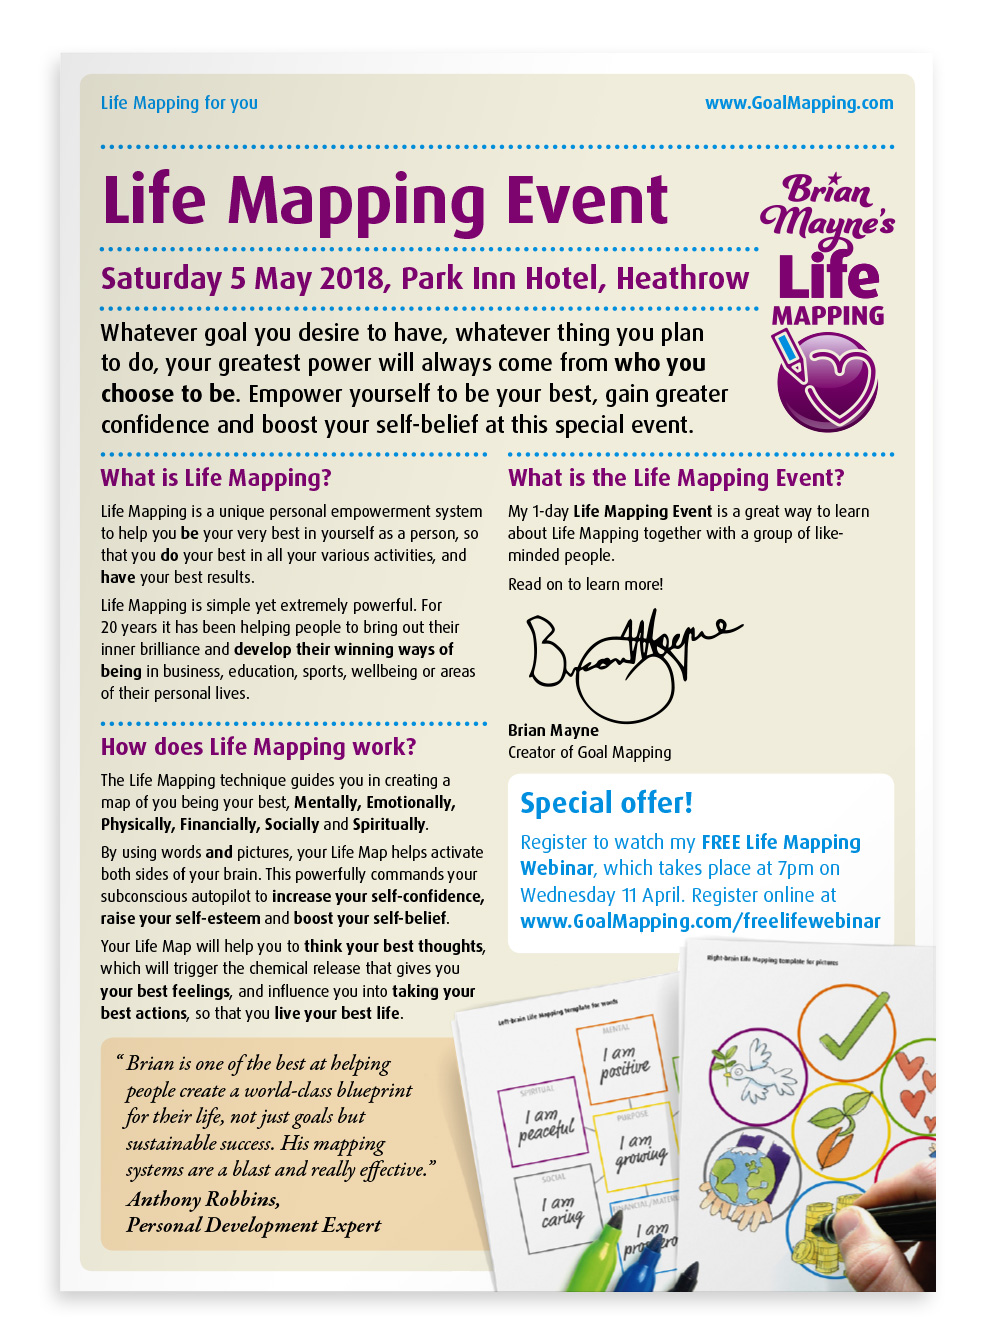 2-page flyer for an Life Mapping workshop